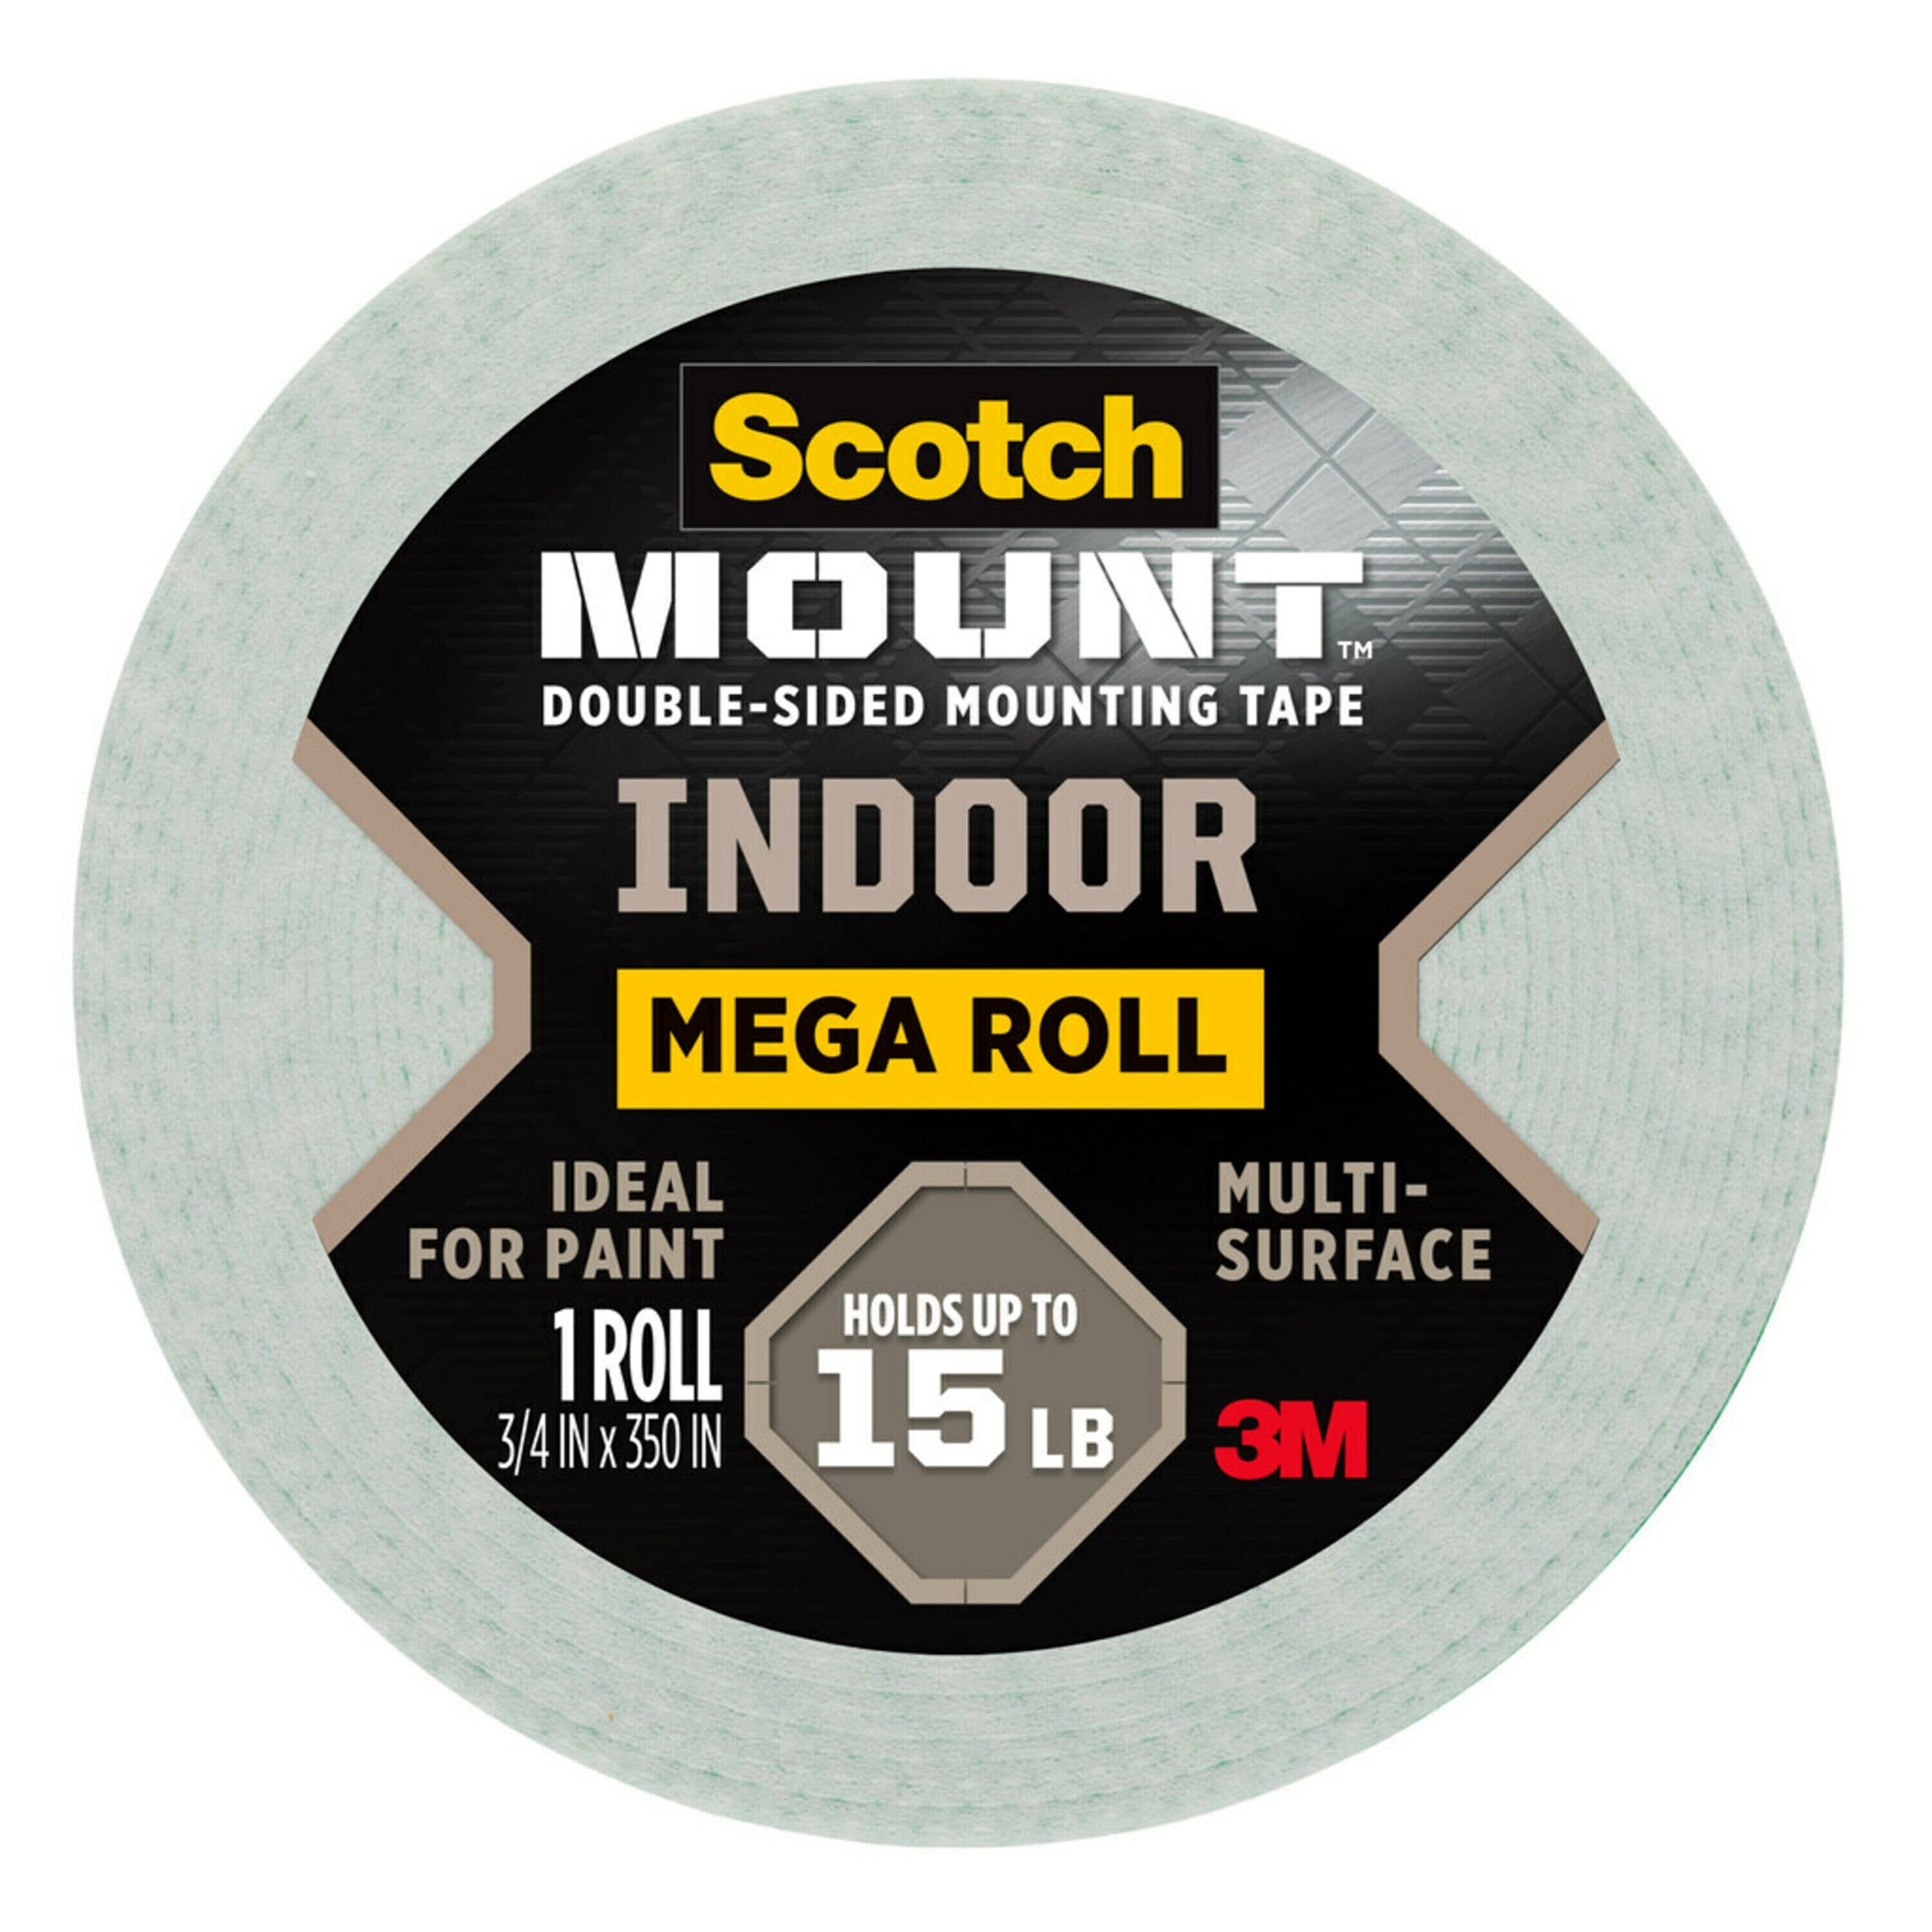 Is 3M Scotch Magic tape archival? Will it damage my movie poster